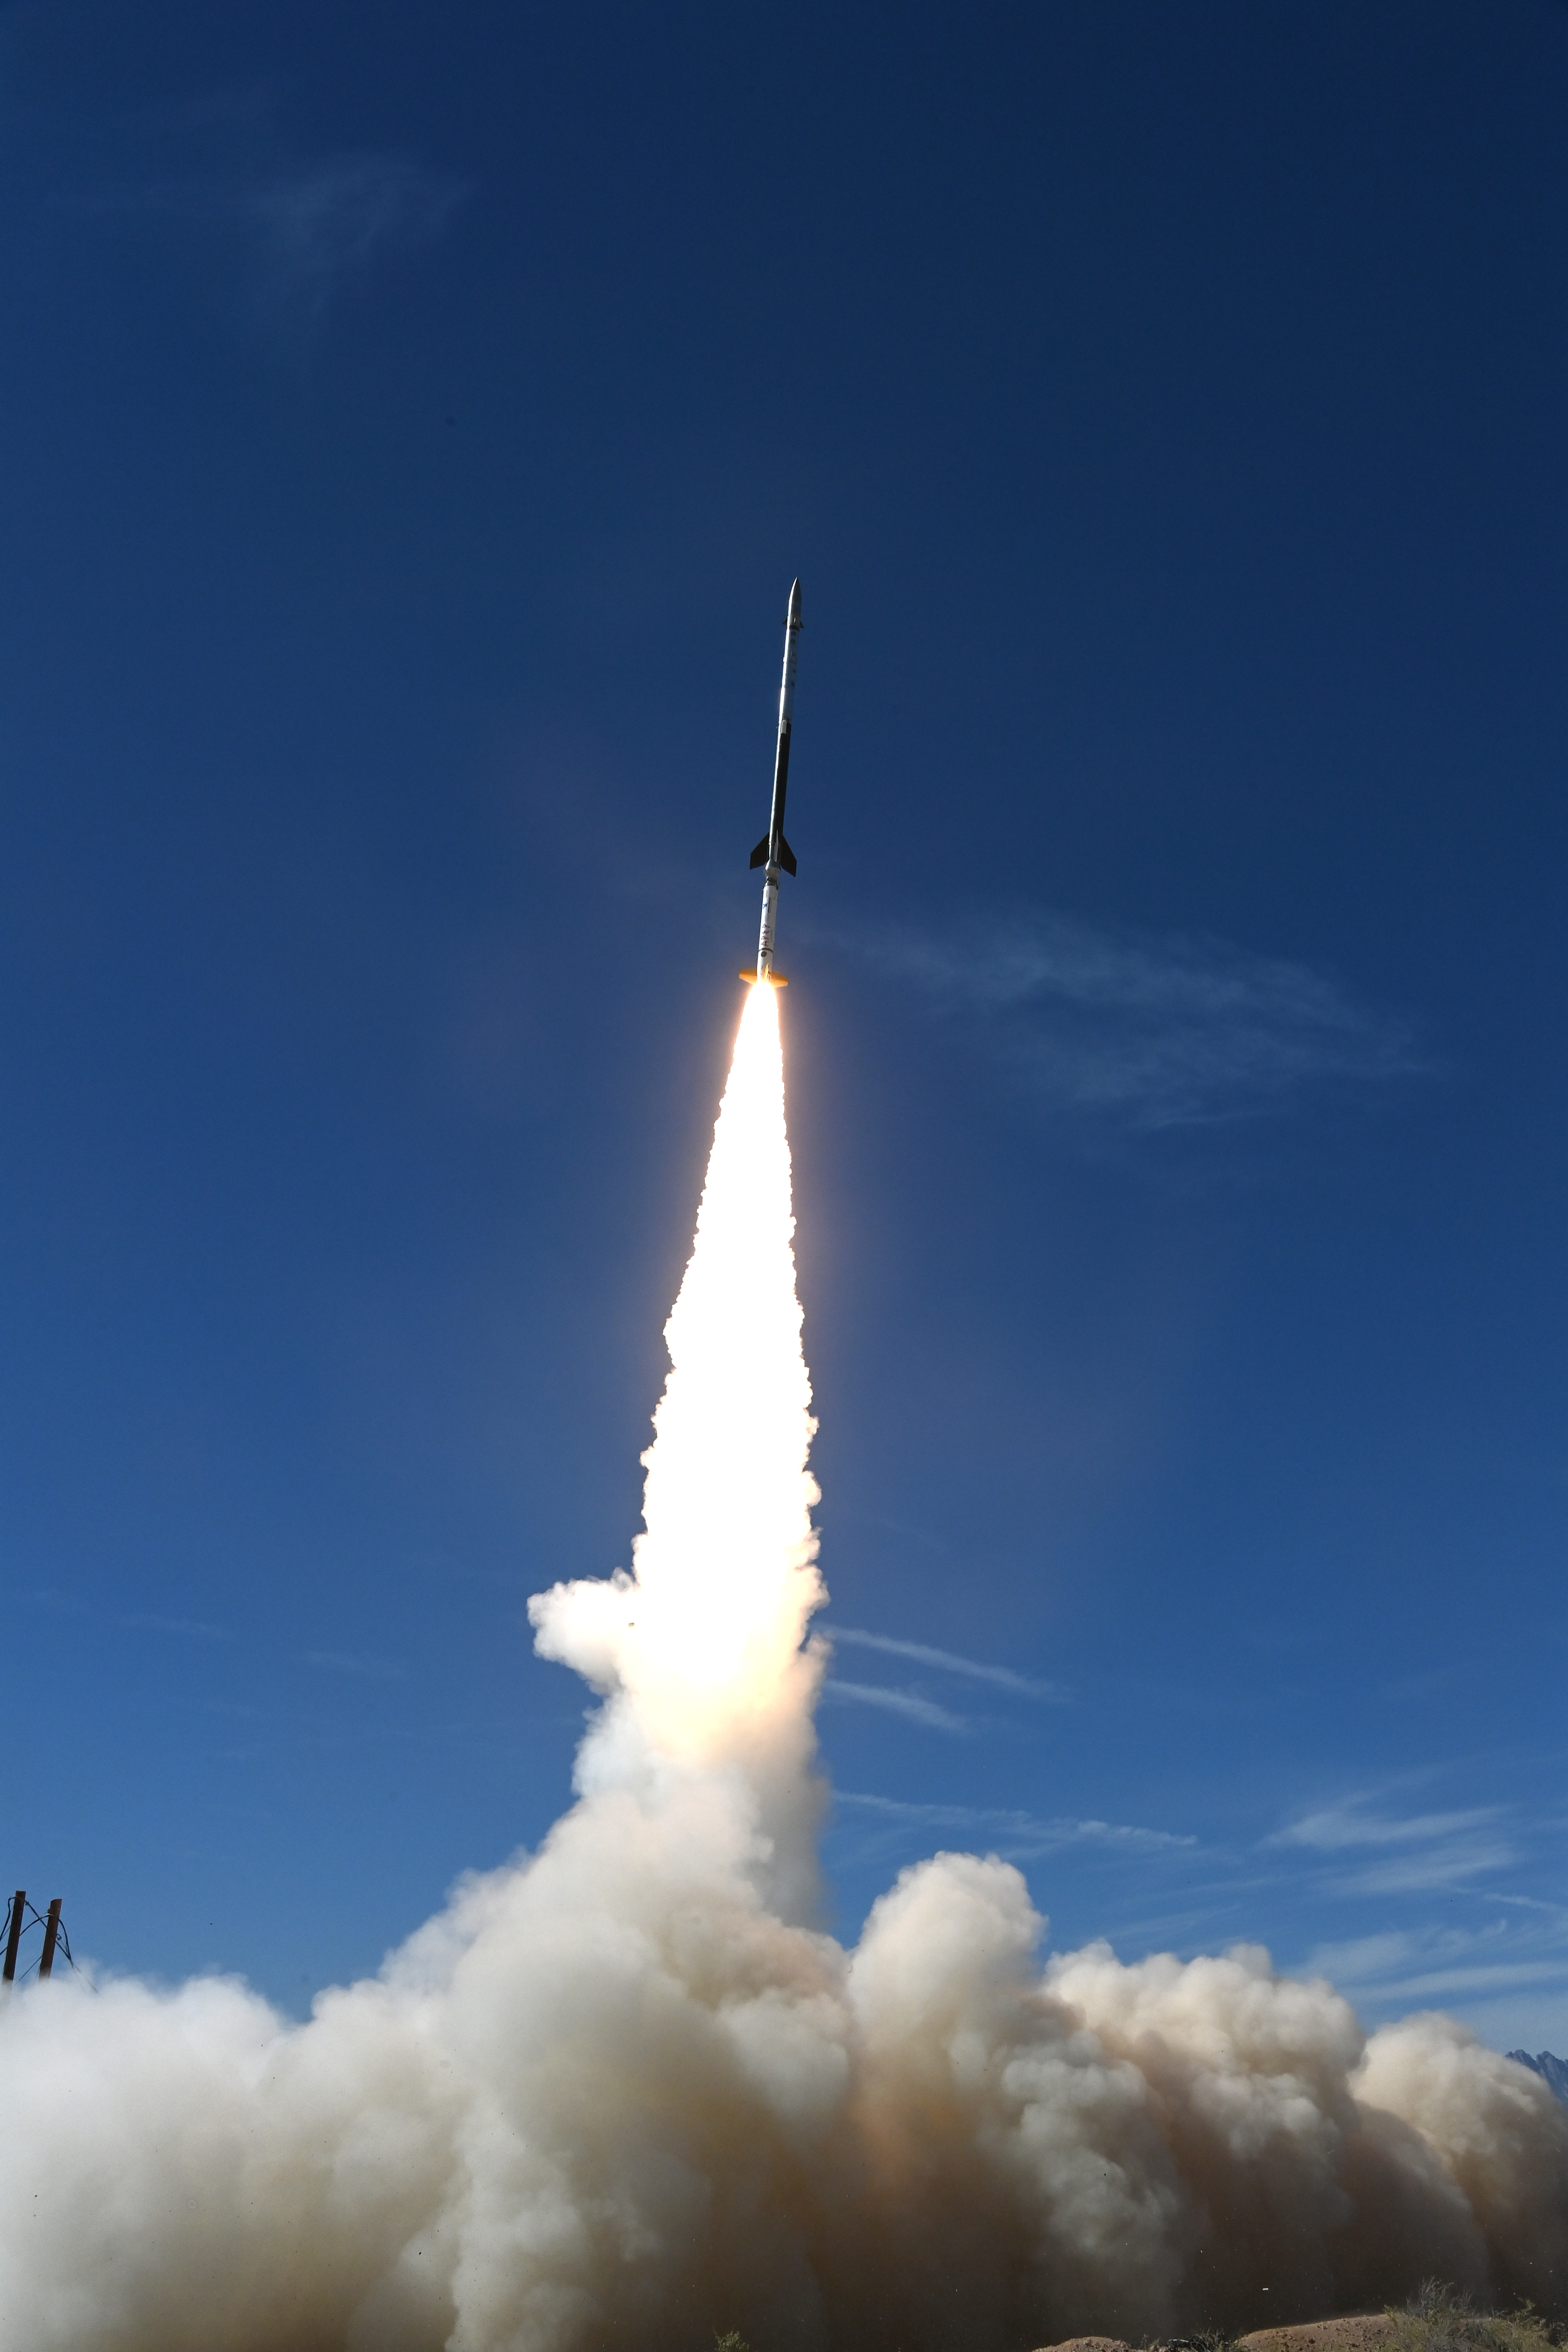 A rocket launches against a blue sky. A cloud of dust gathers below the rocket.